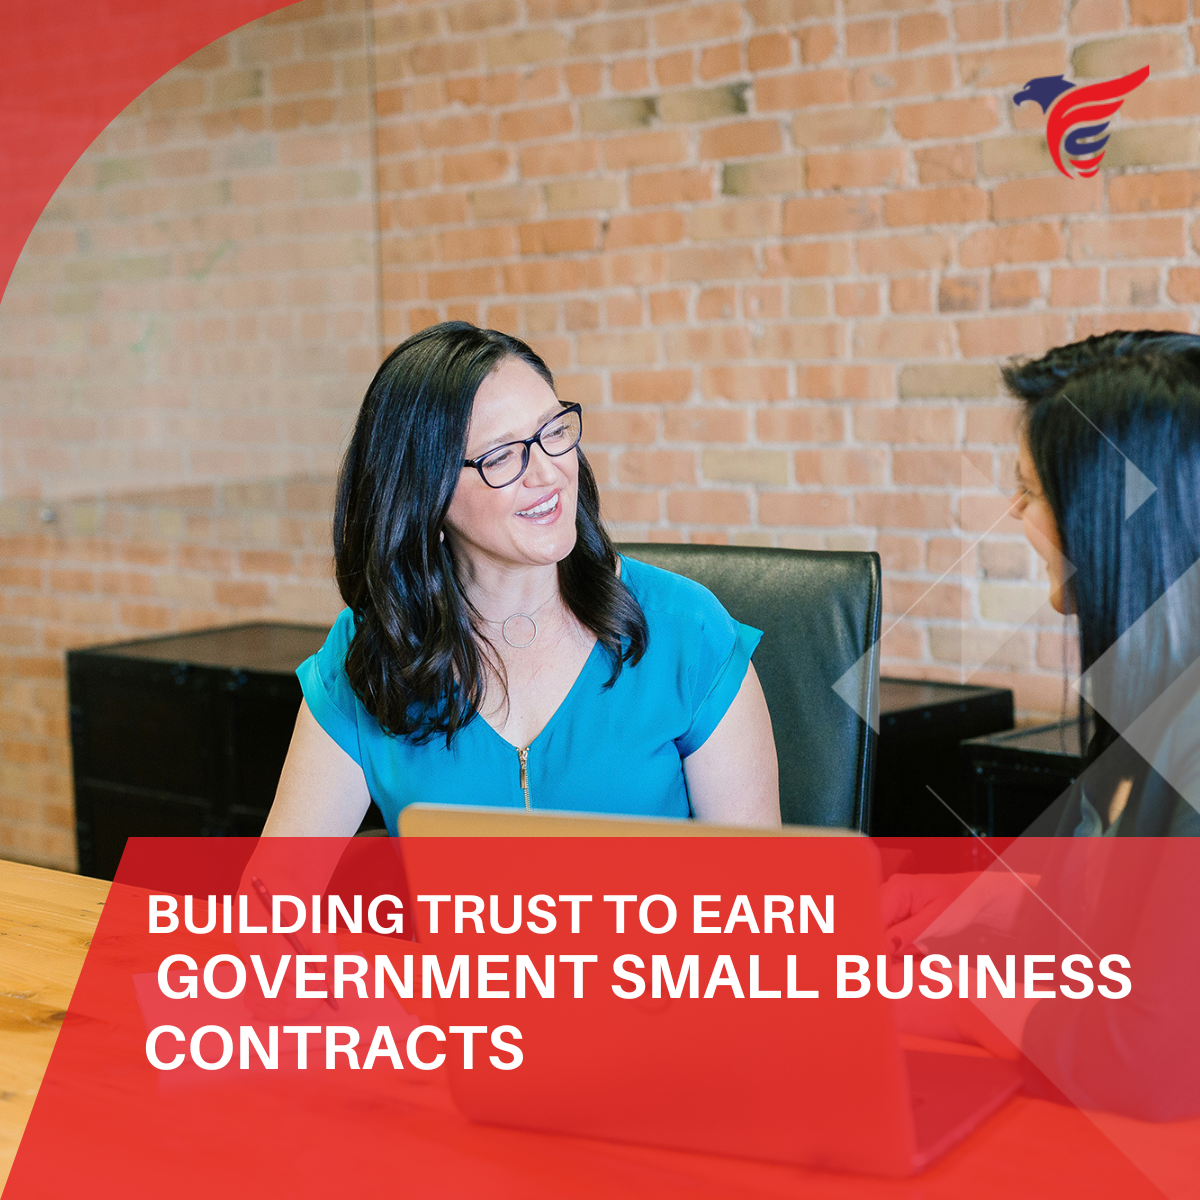 Building Trust to Earn Government Small Business Contracts